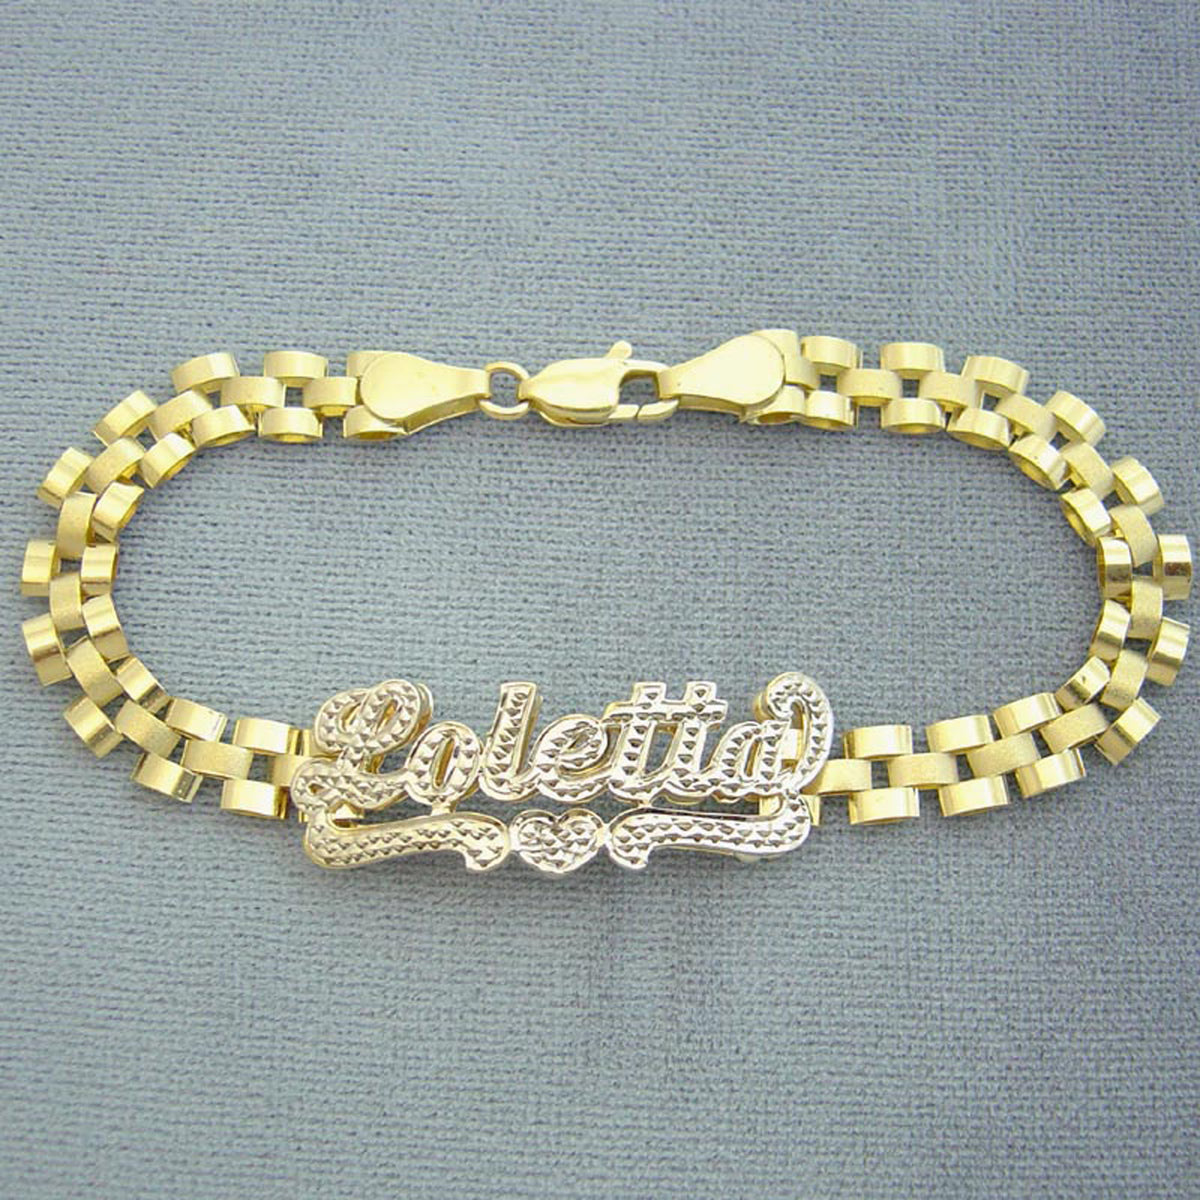 10K Solid Gold 6.0 mm Presidential Watch Band Style Link 3D Iced Out Nameplate Bracelet Anklet